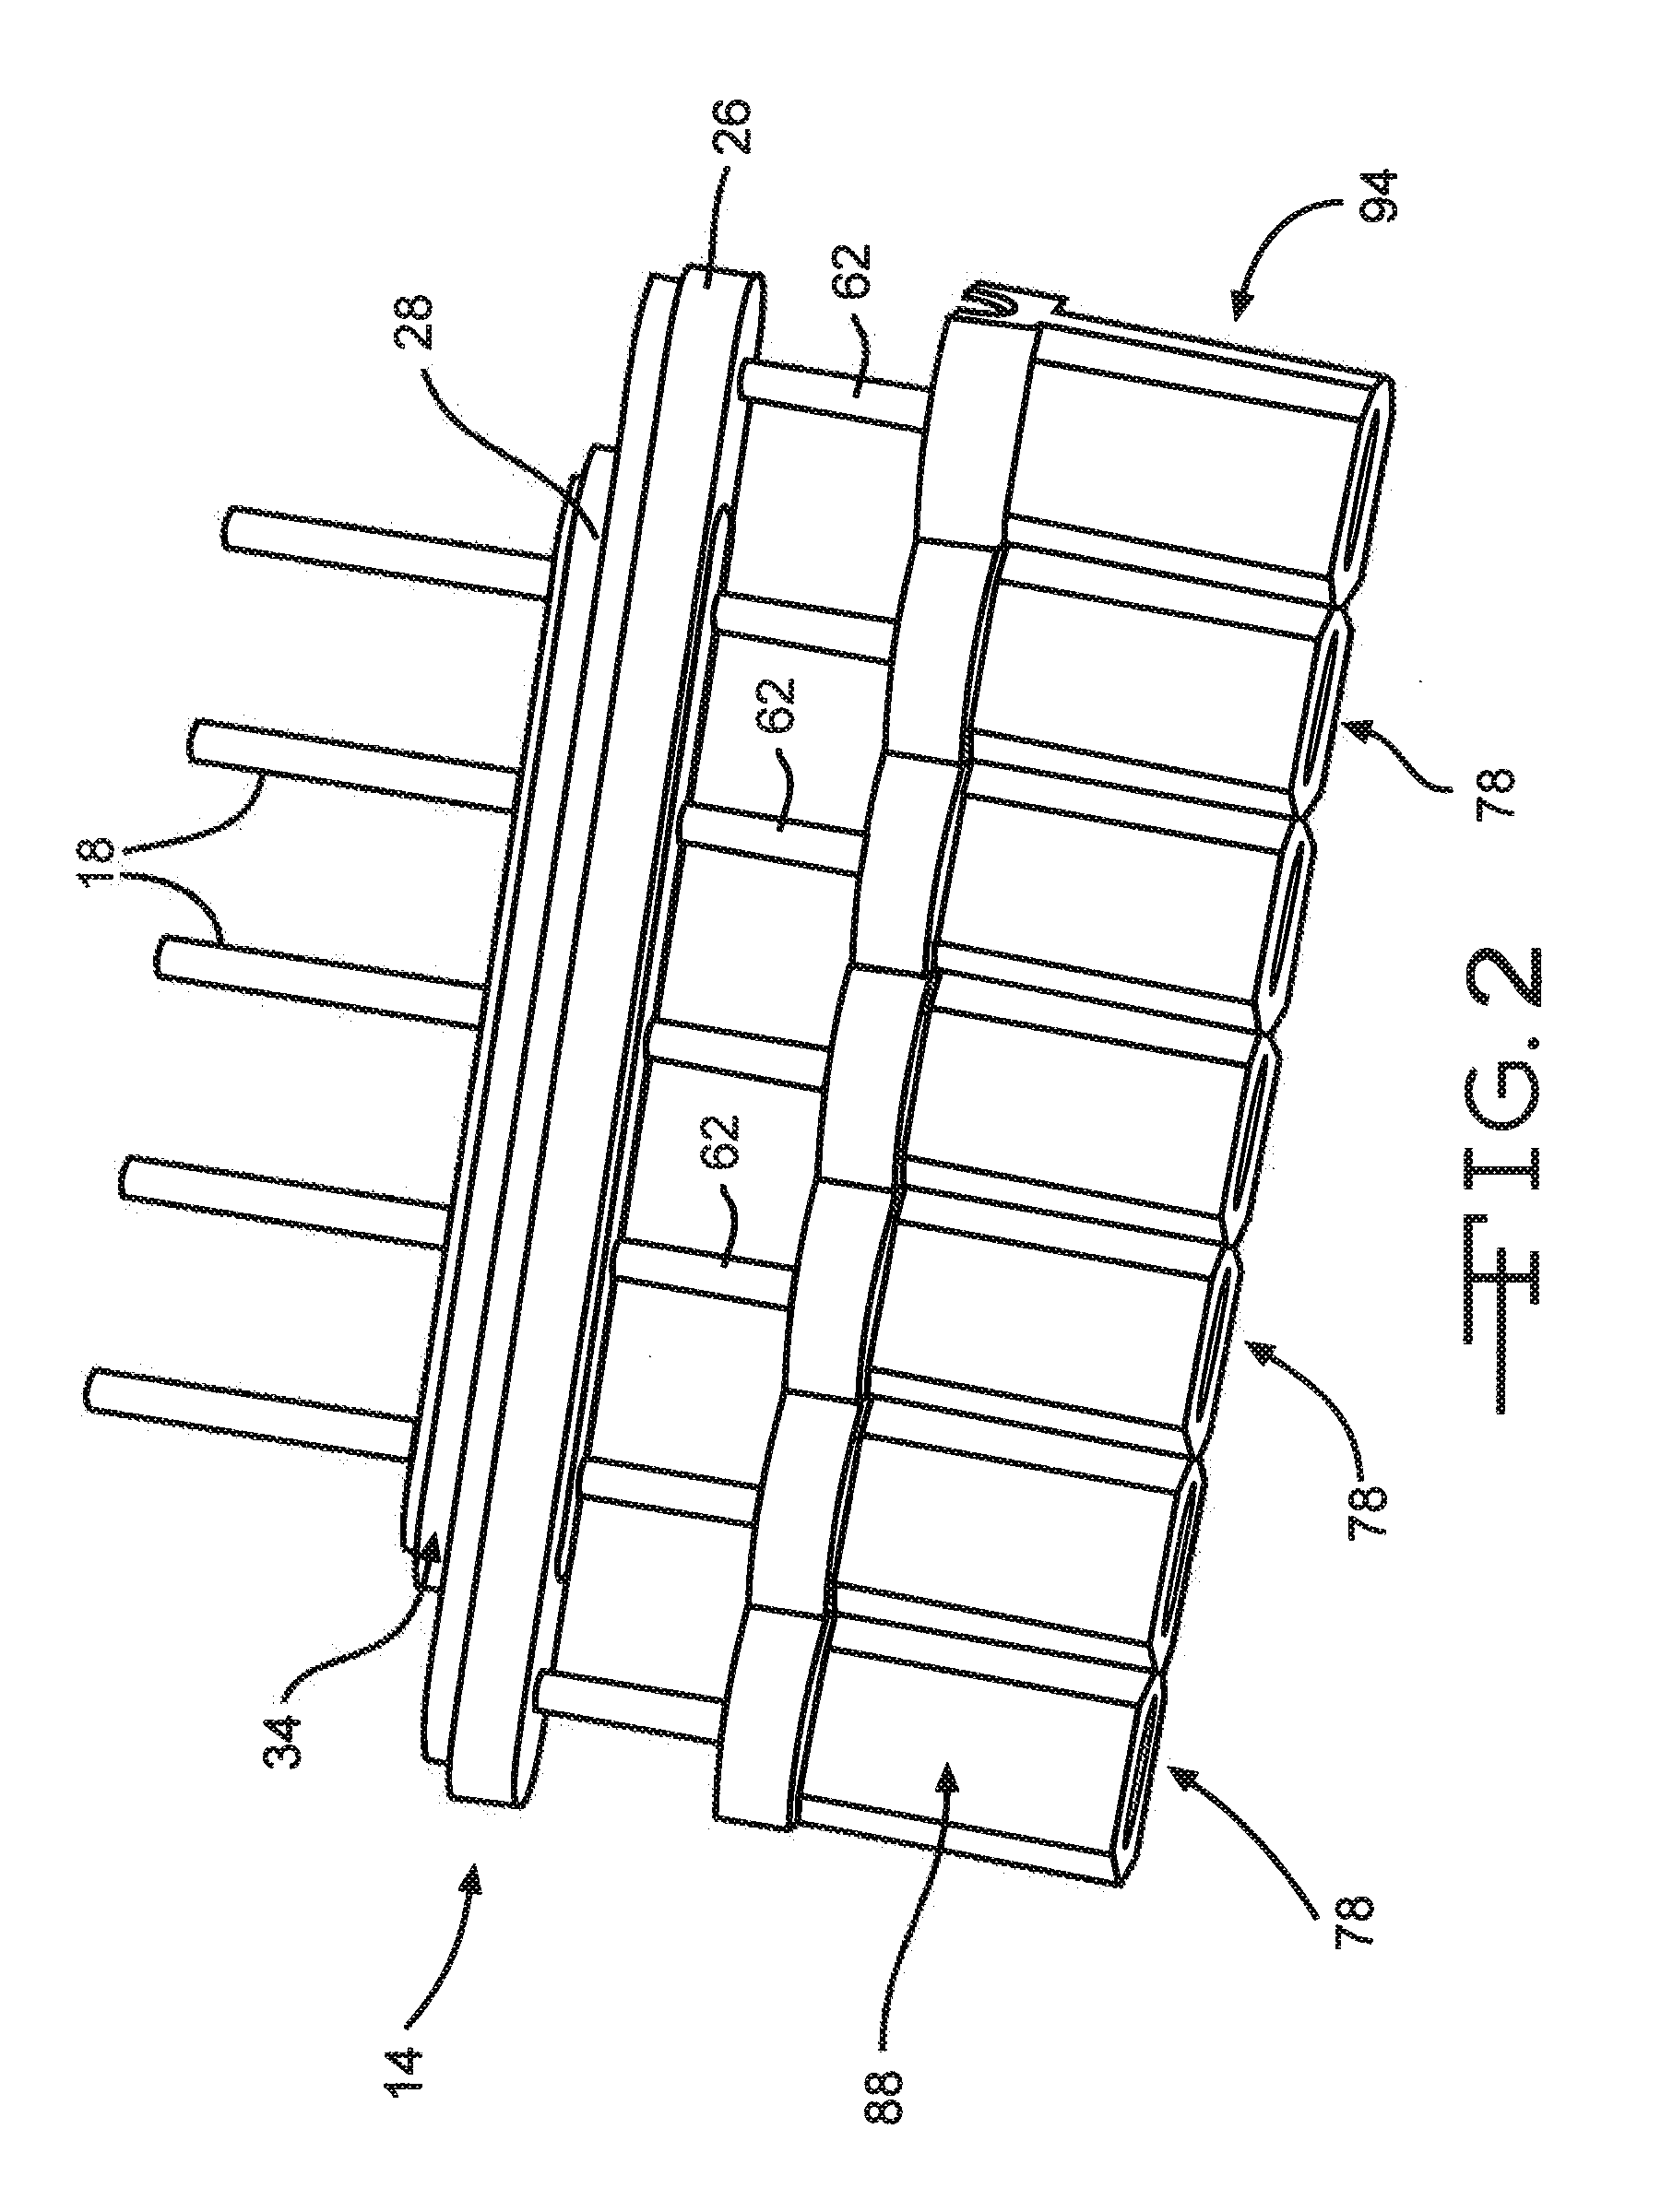 Feedthrough Wire Connector for Use in a Medical Device